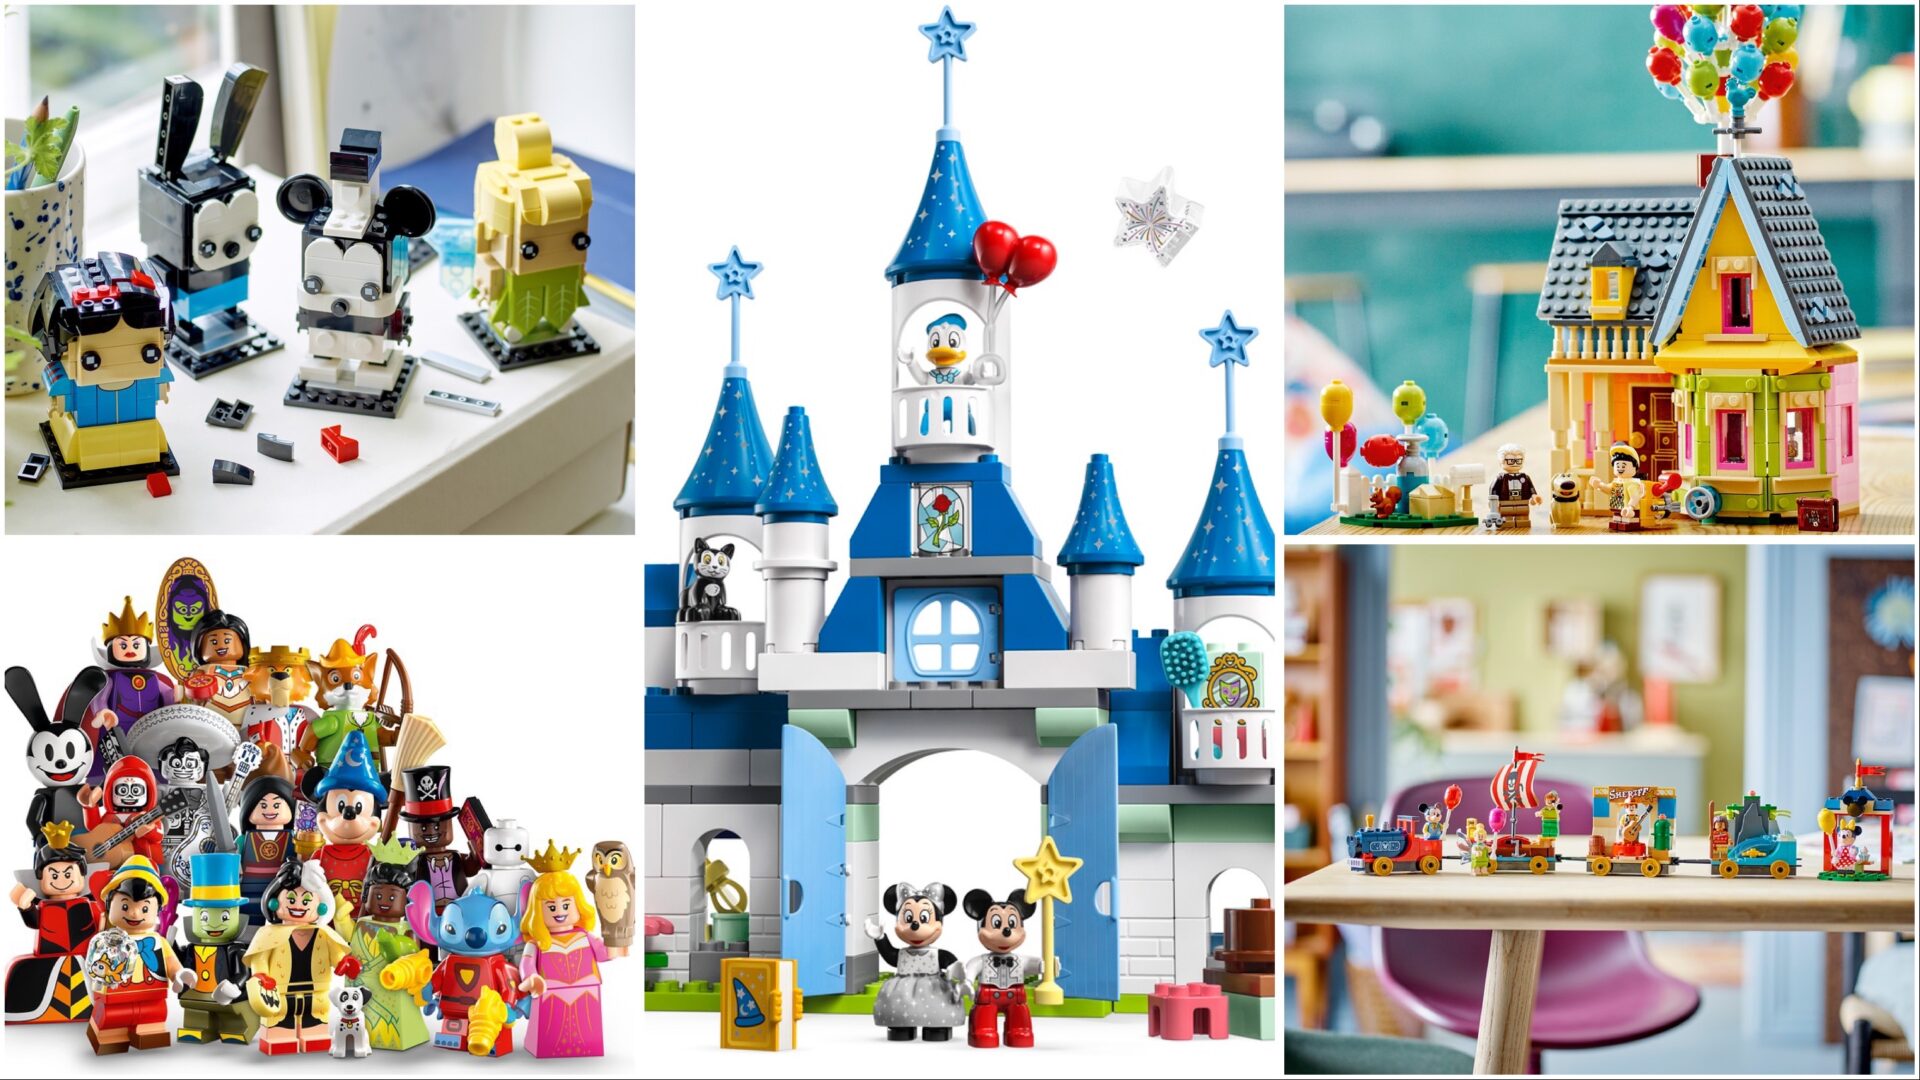 New Disney100 Lego Sets & Minifigures Have Been Officially Announced!